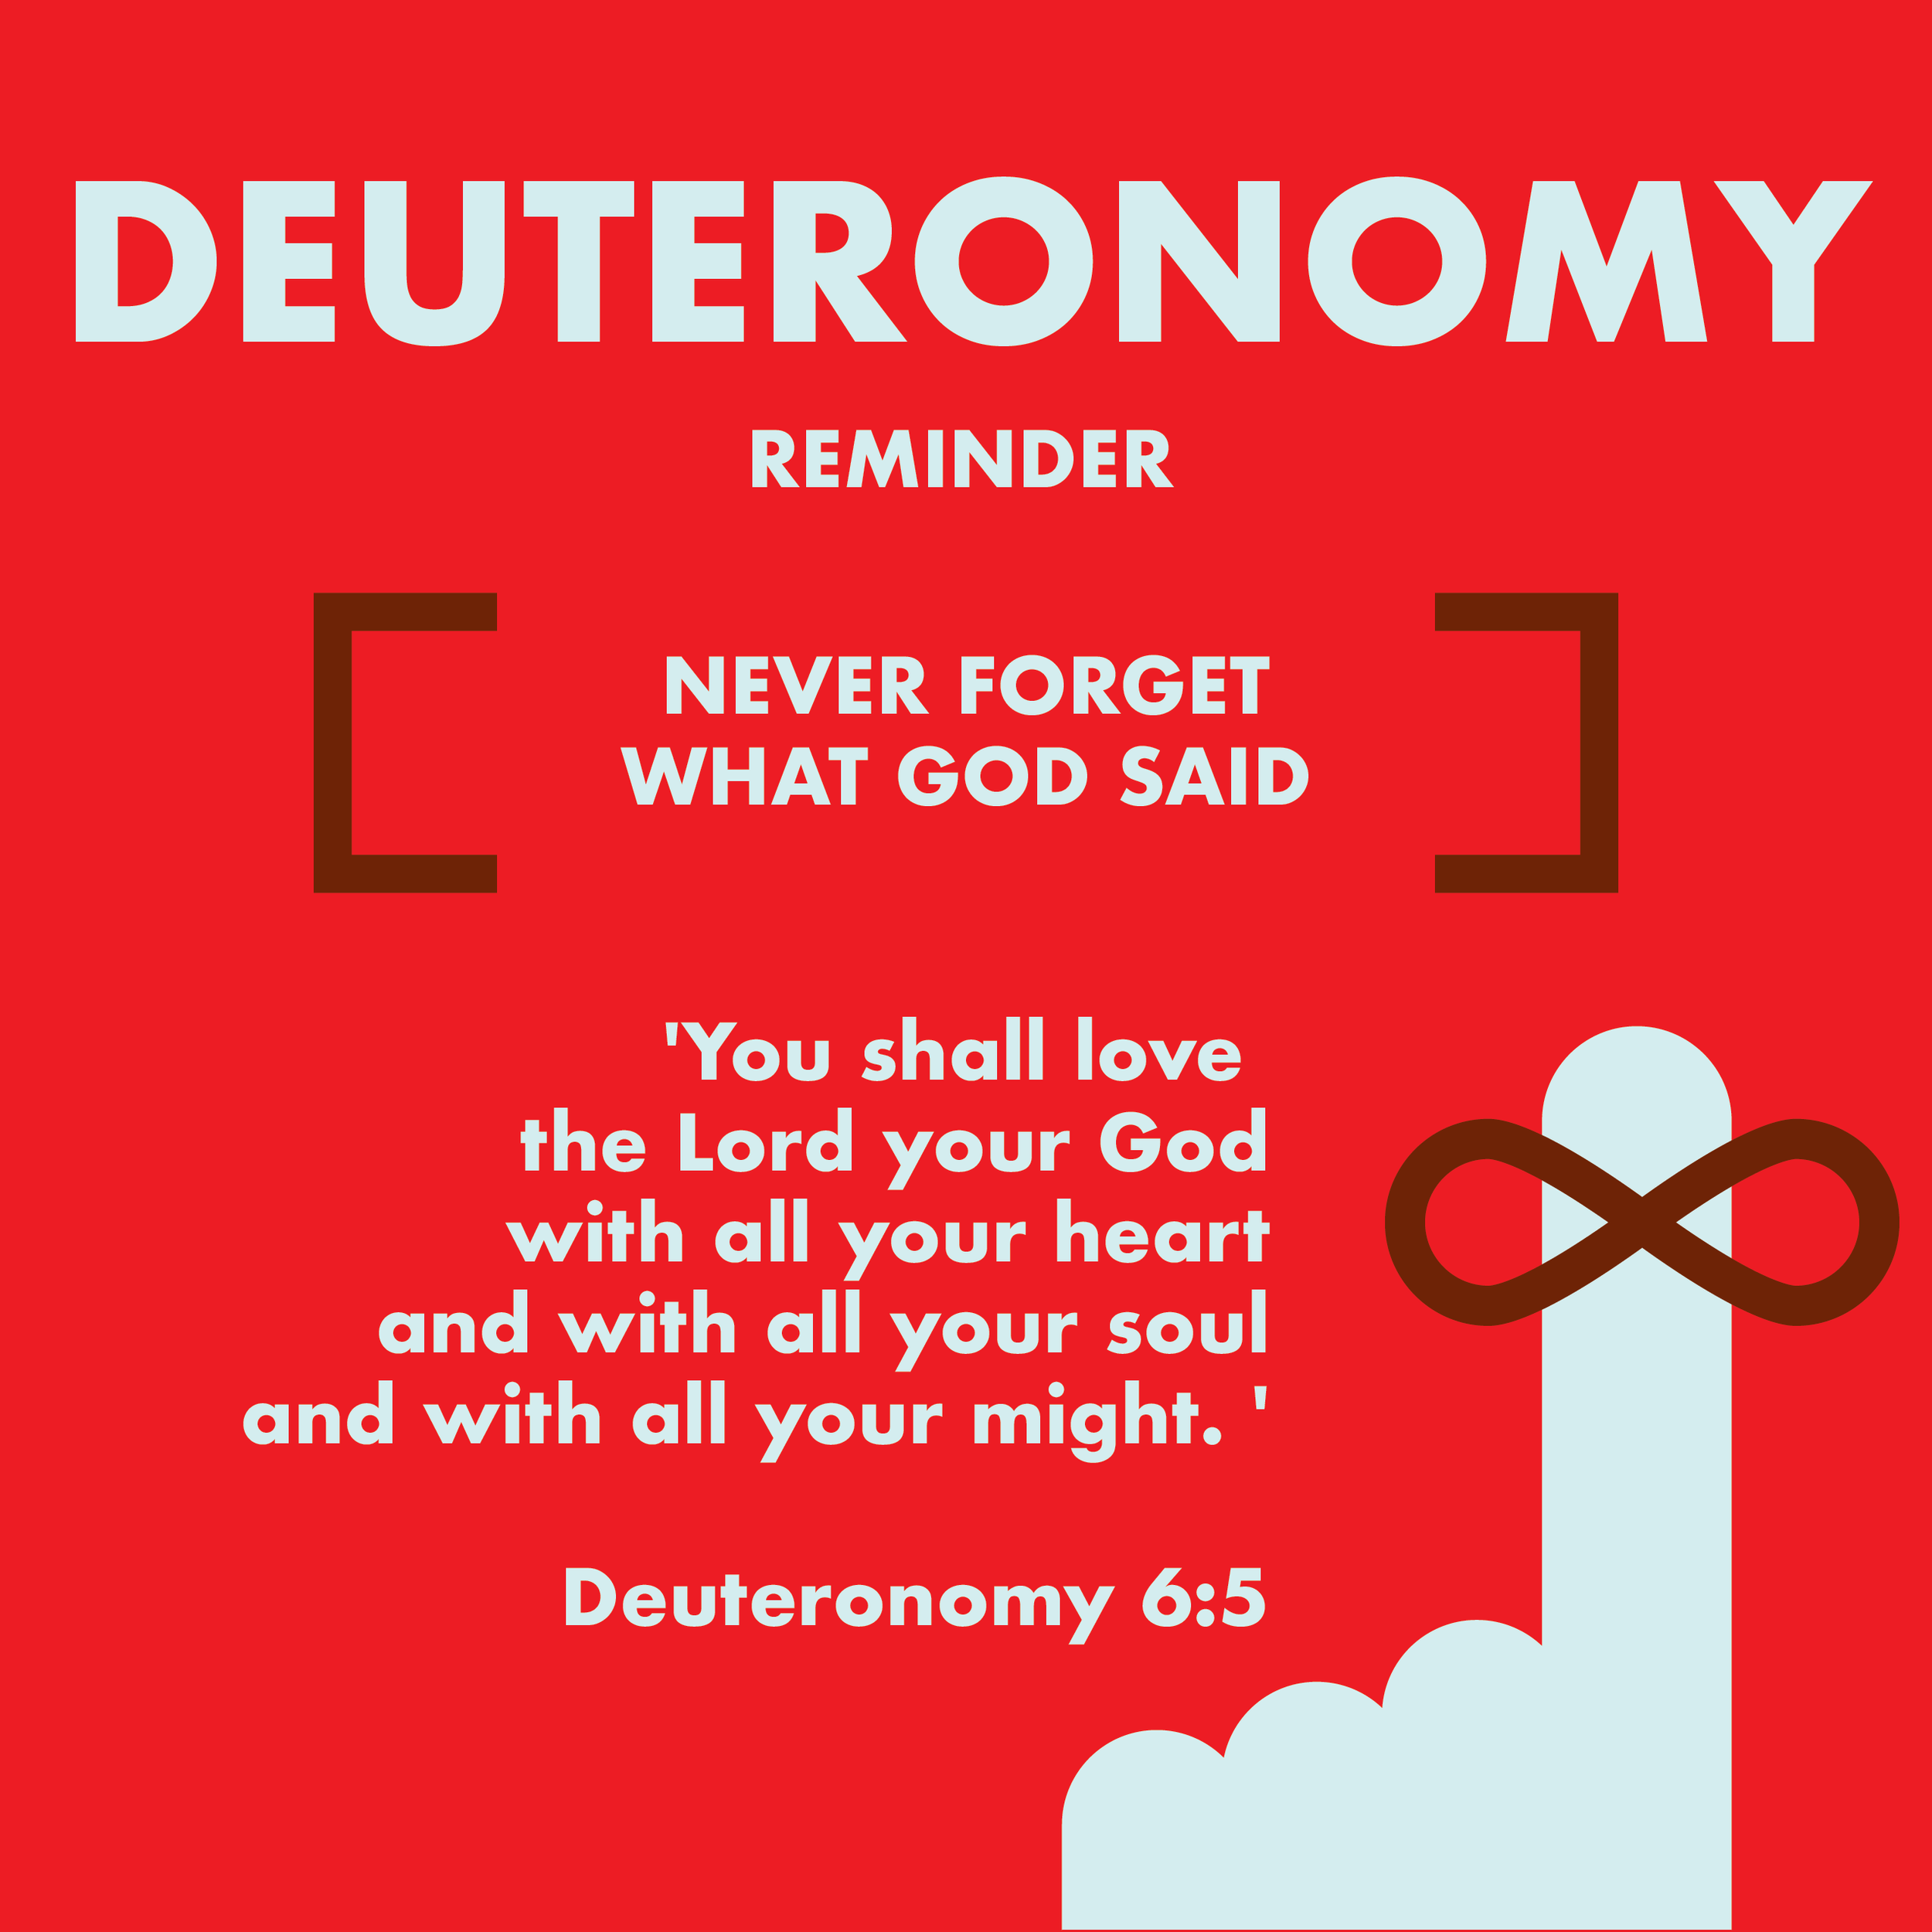 Books of the Bible_posters_05 Deuteronomy.png